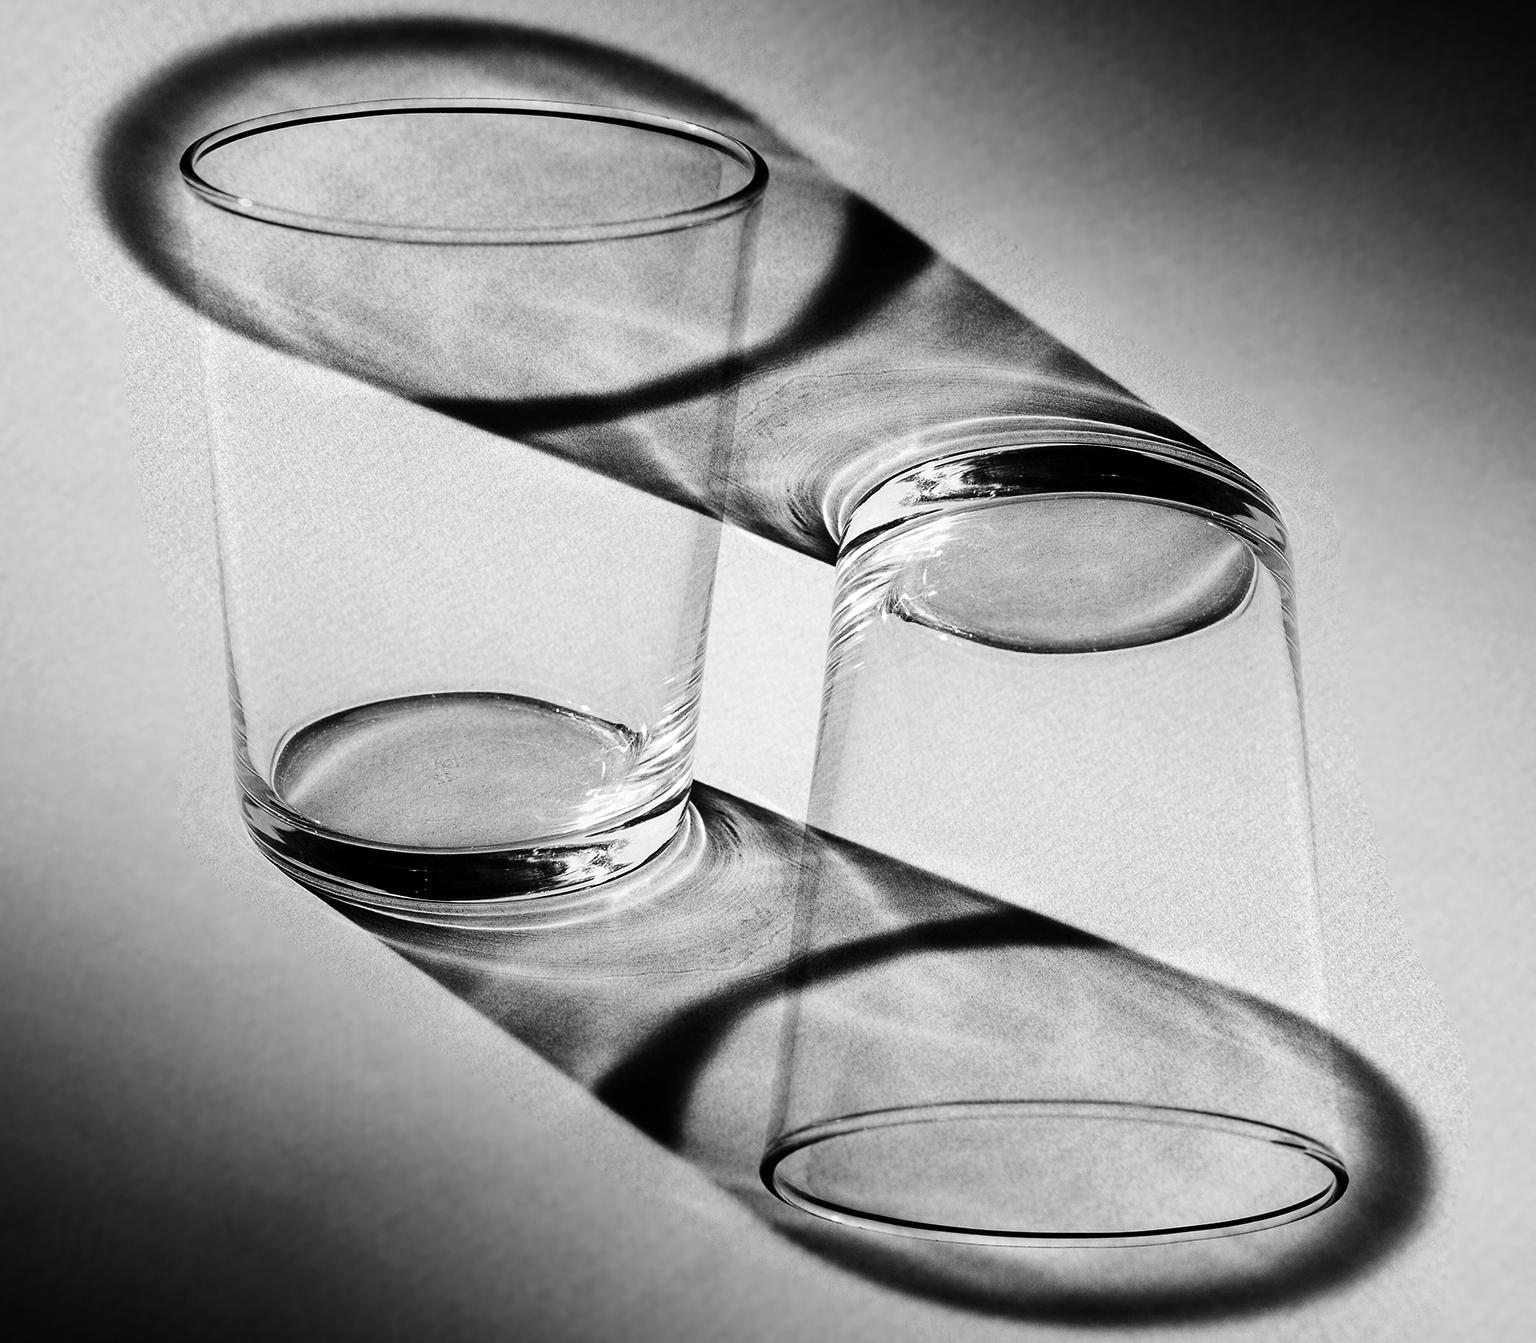 “Inverted Glass”, 2005. Archival Pigment Print. 11